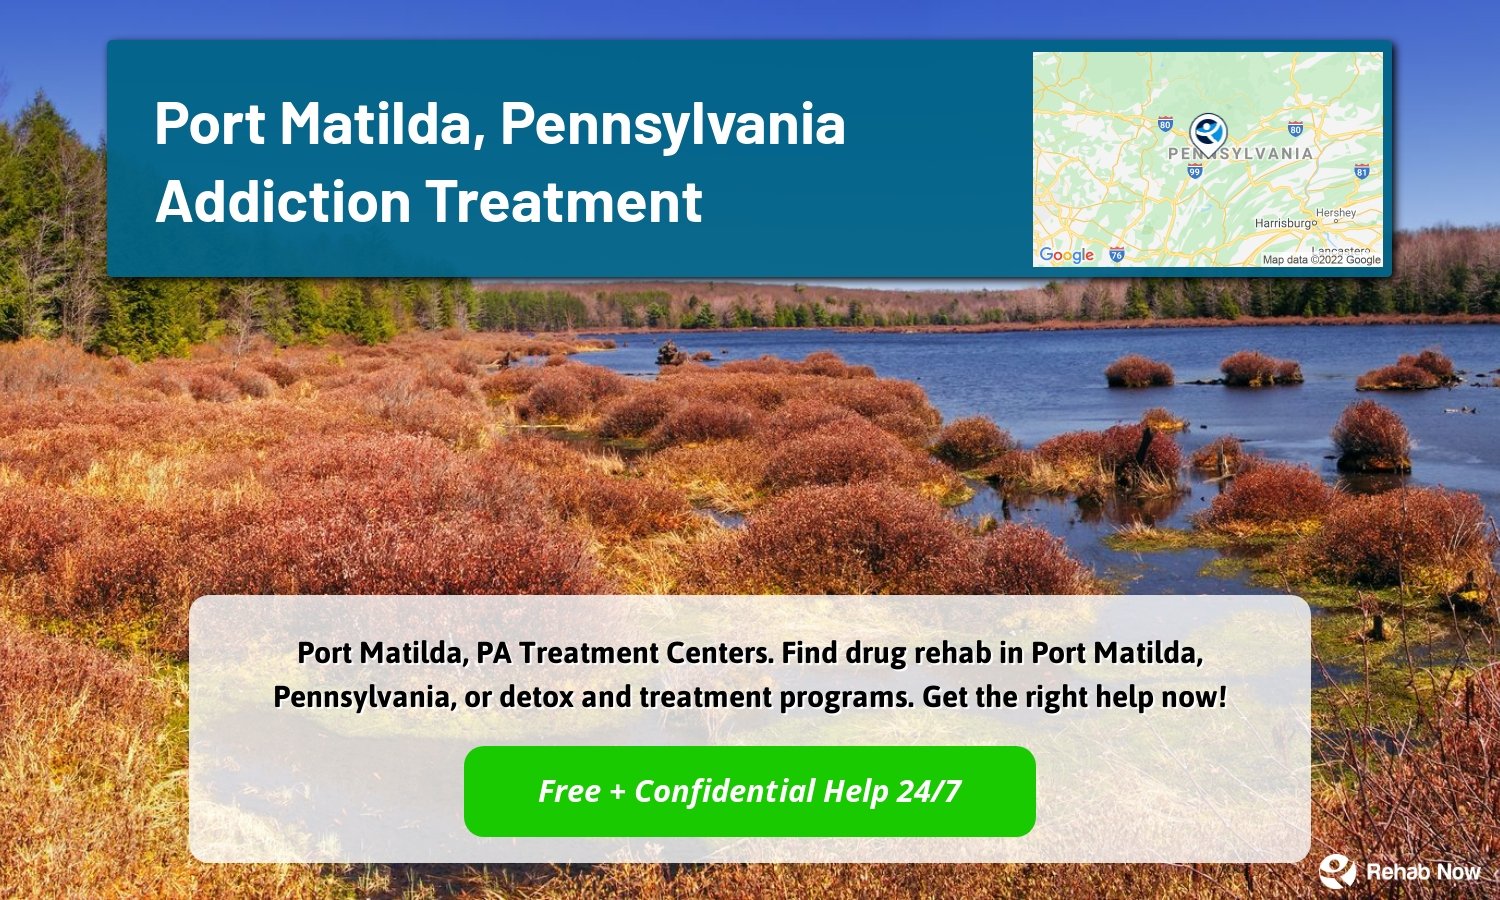 Port Matilda, PA Treatment Centers. Find drug rehab in Port Matilda, Pennsylvania, or detox and treatment programs. Get the right help now!